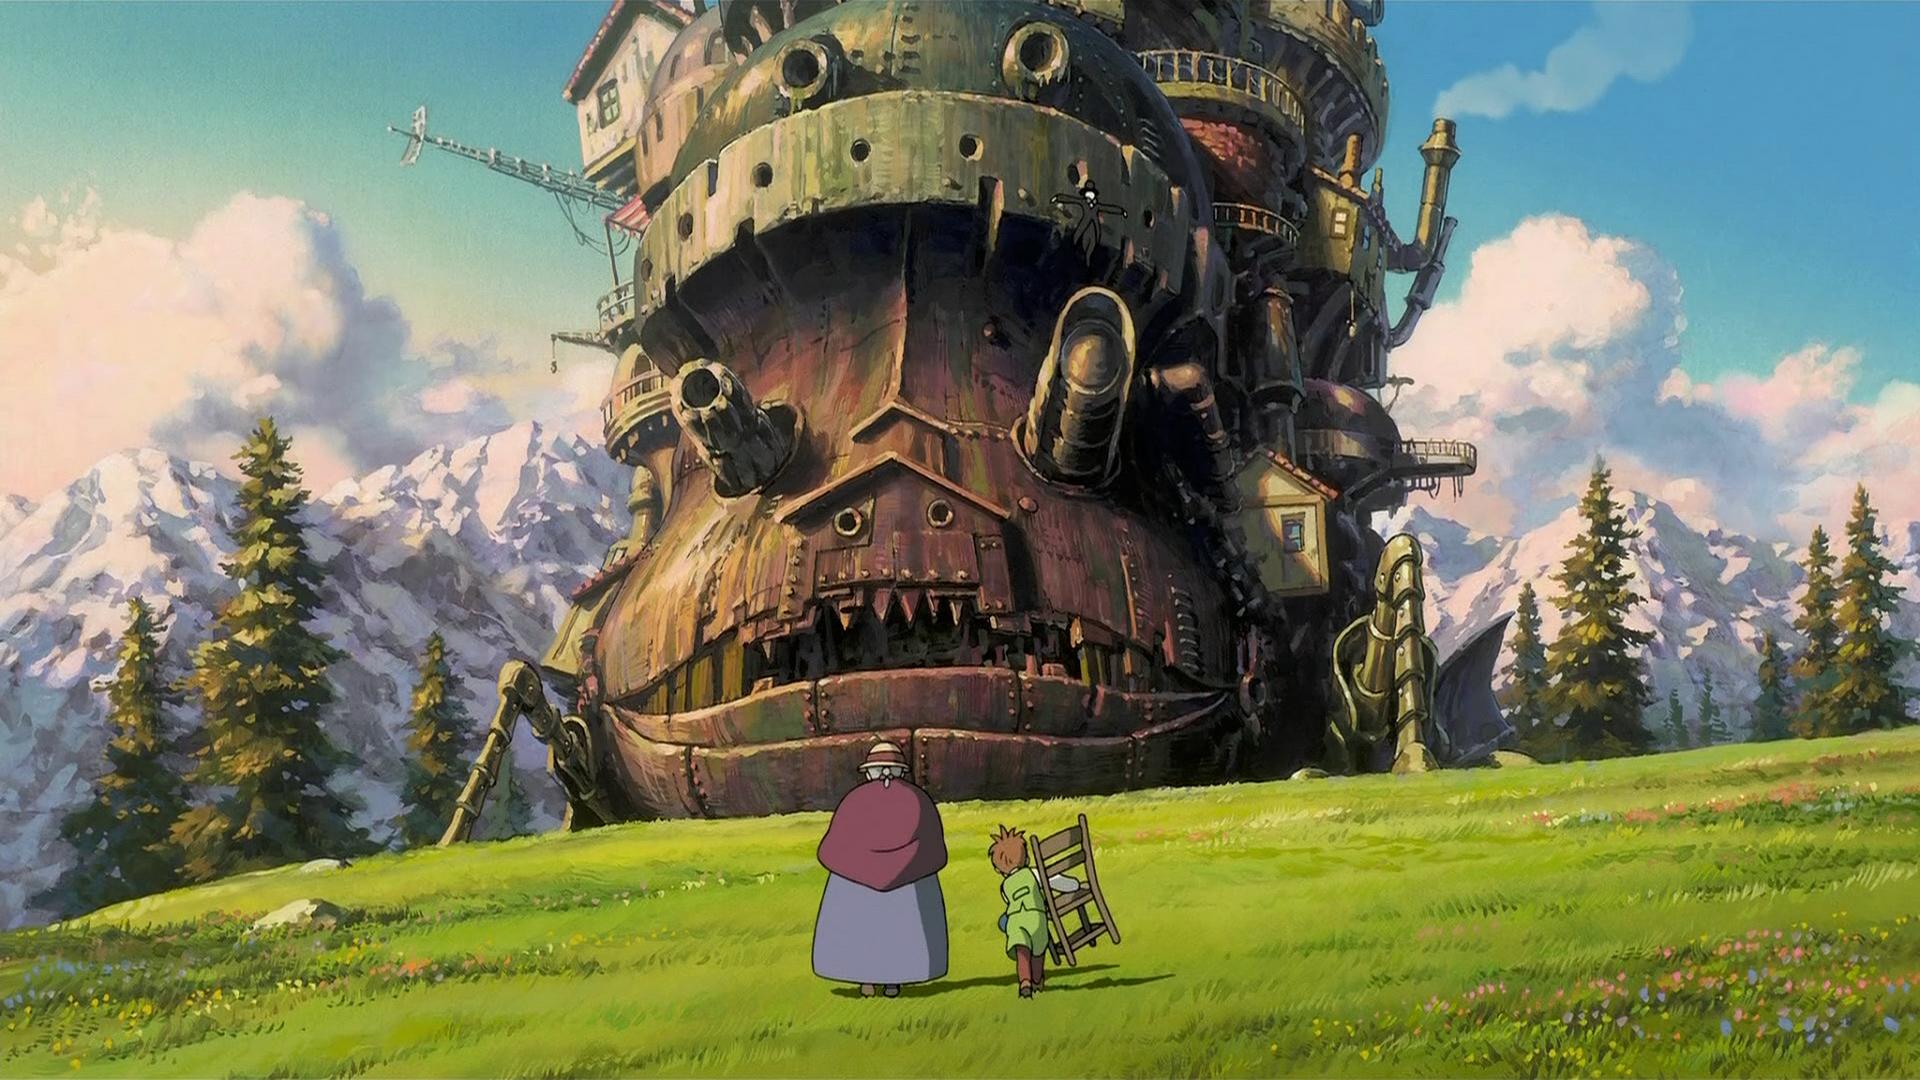 Howls Moving Castle Wallpaper Widescreen 69 images